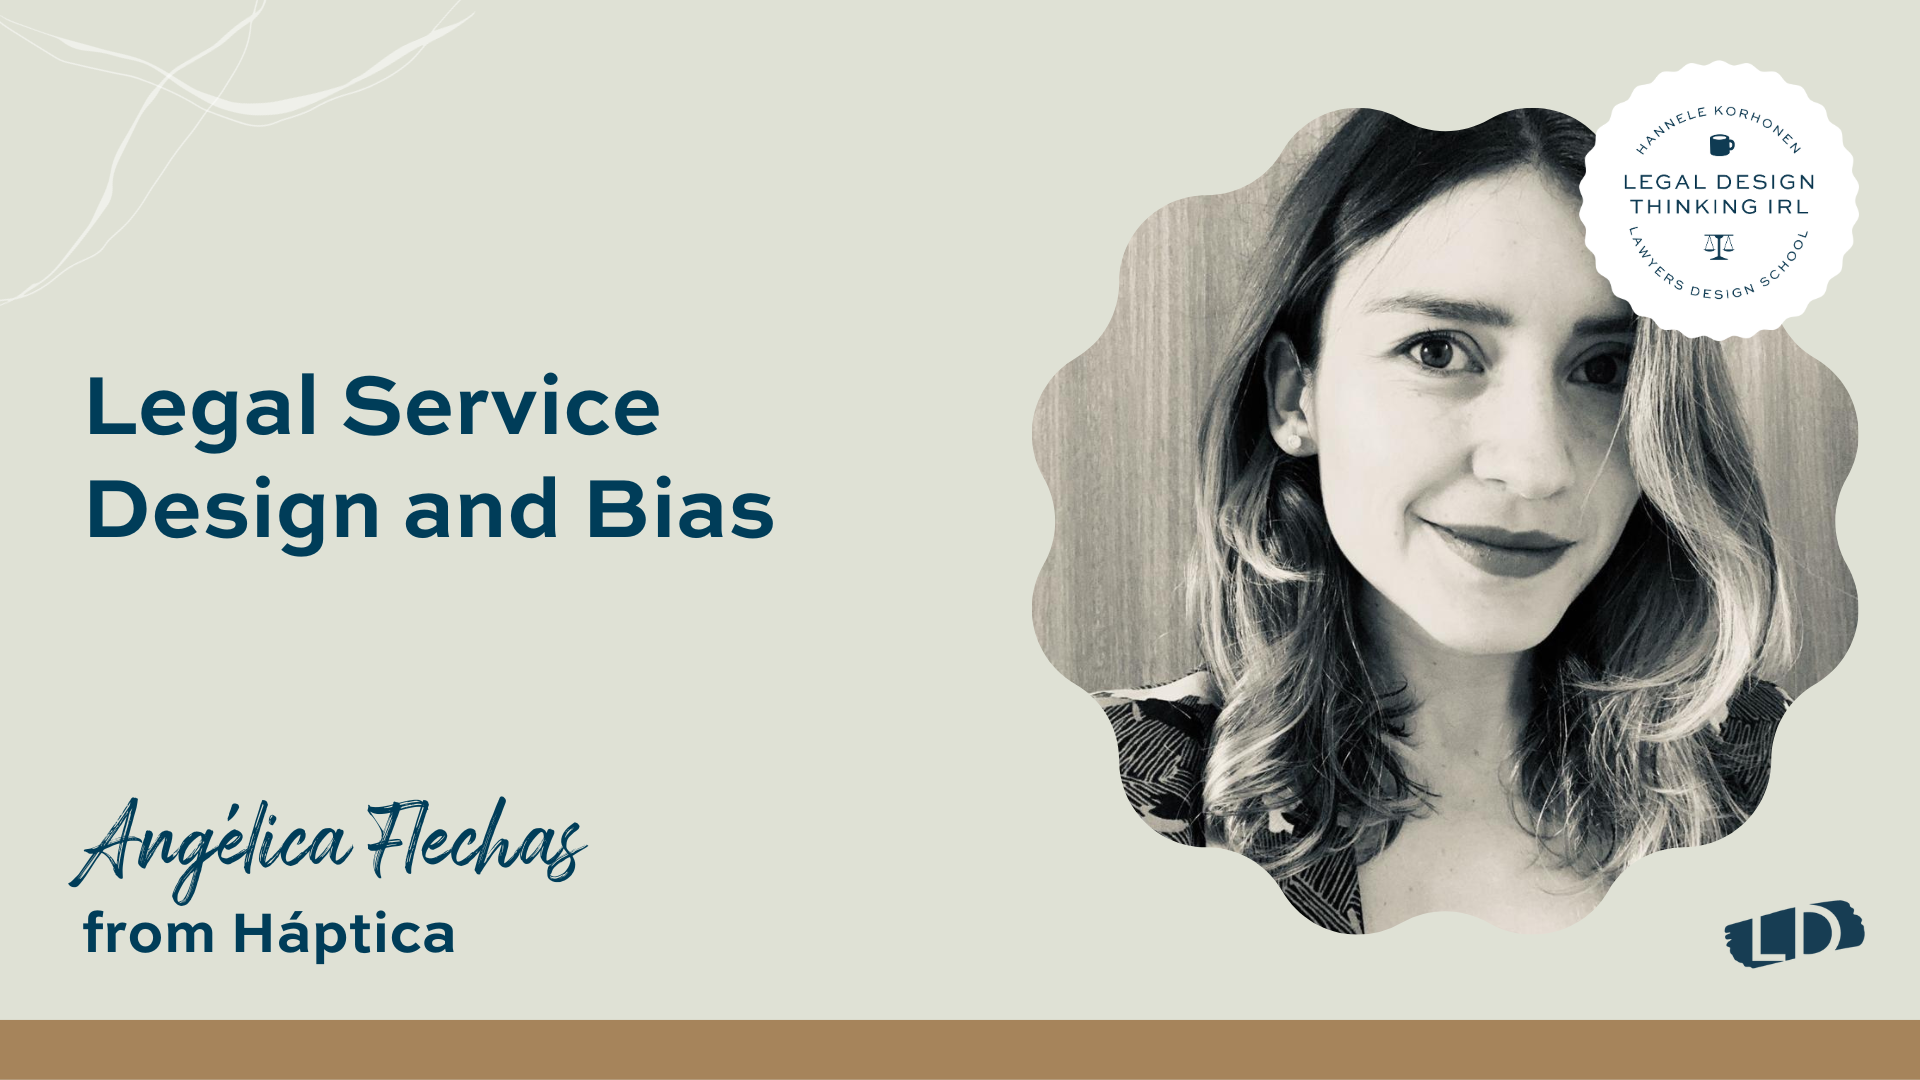 Legal Service Design and Bias with Angélica Flechas from Háptica